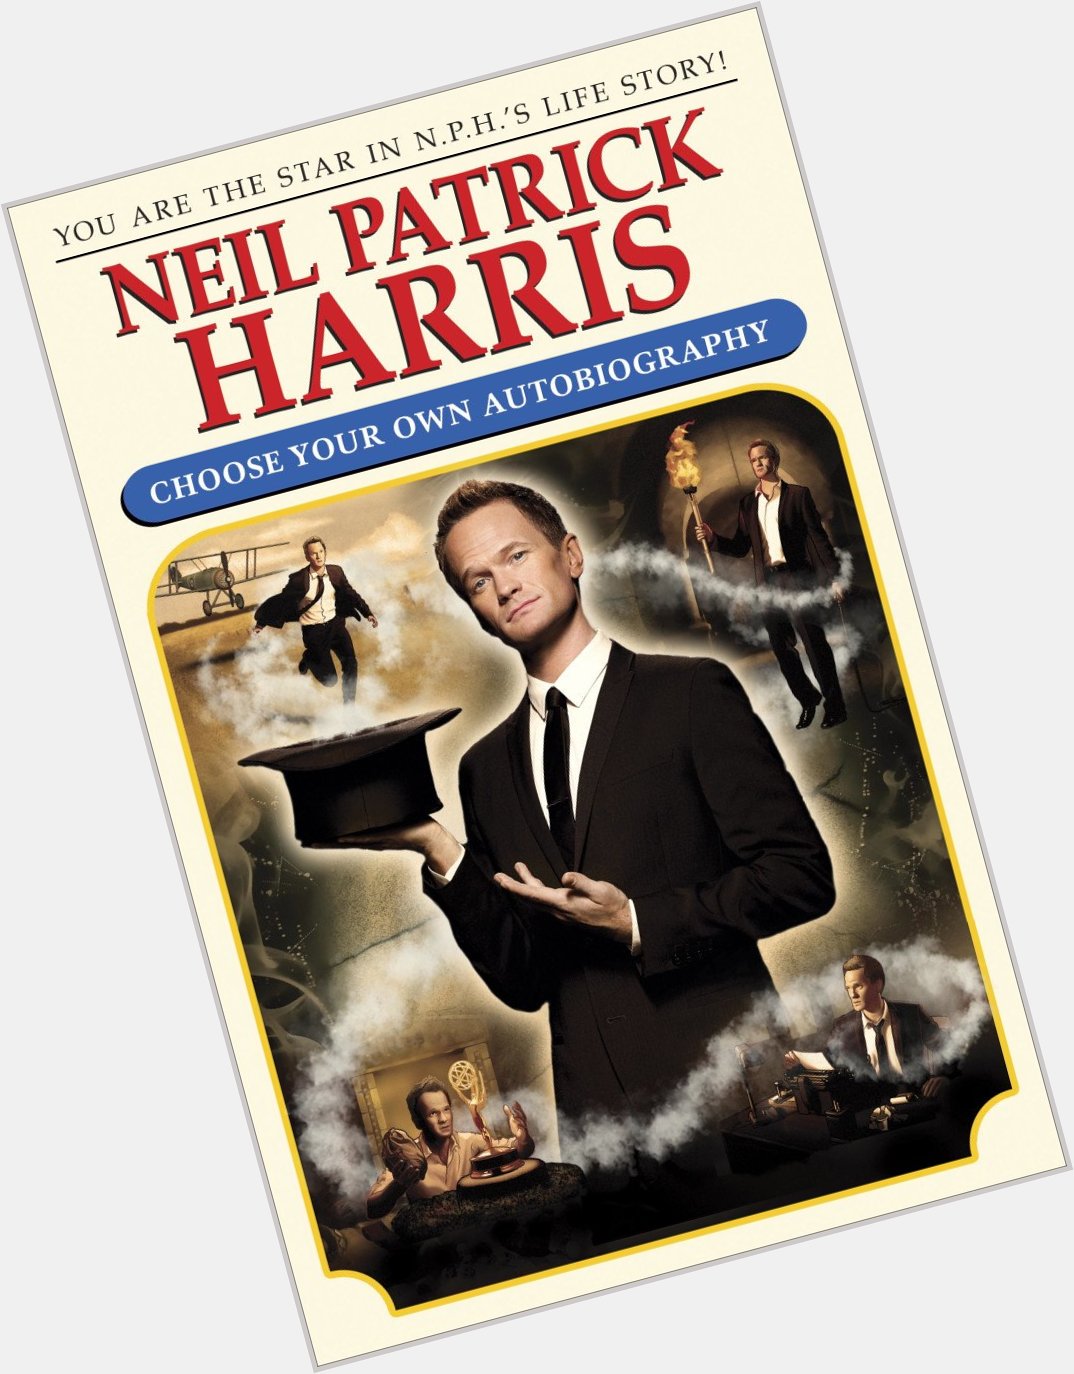 And happy birthday to Doogie Howser, M.D., aka Neil Patrick Harris who is 45 today! 